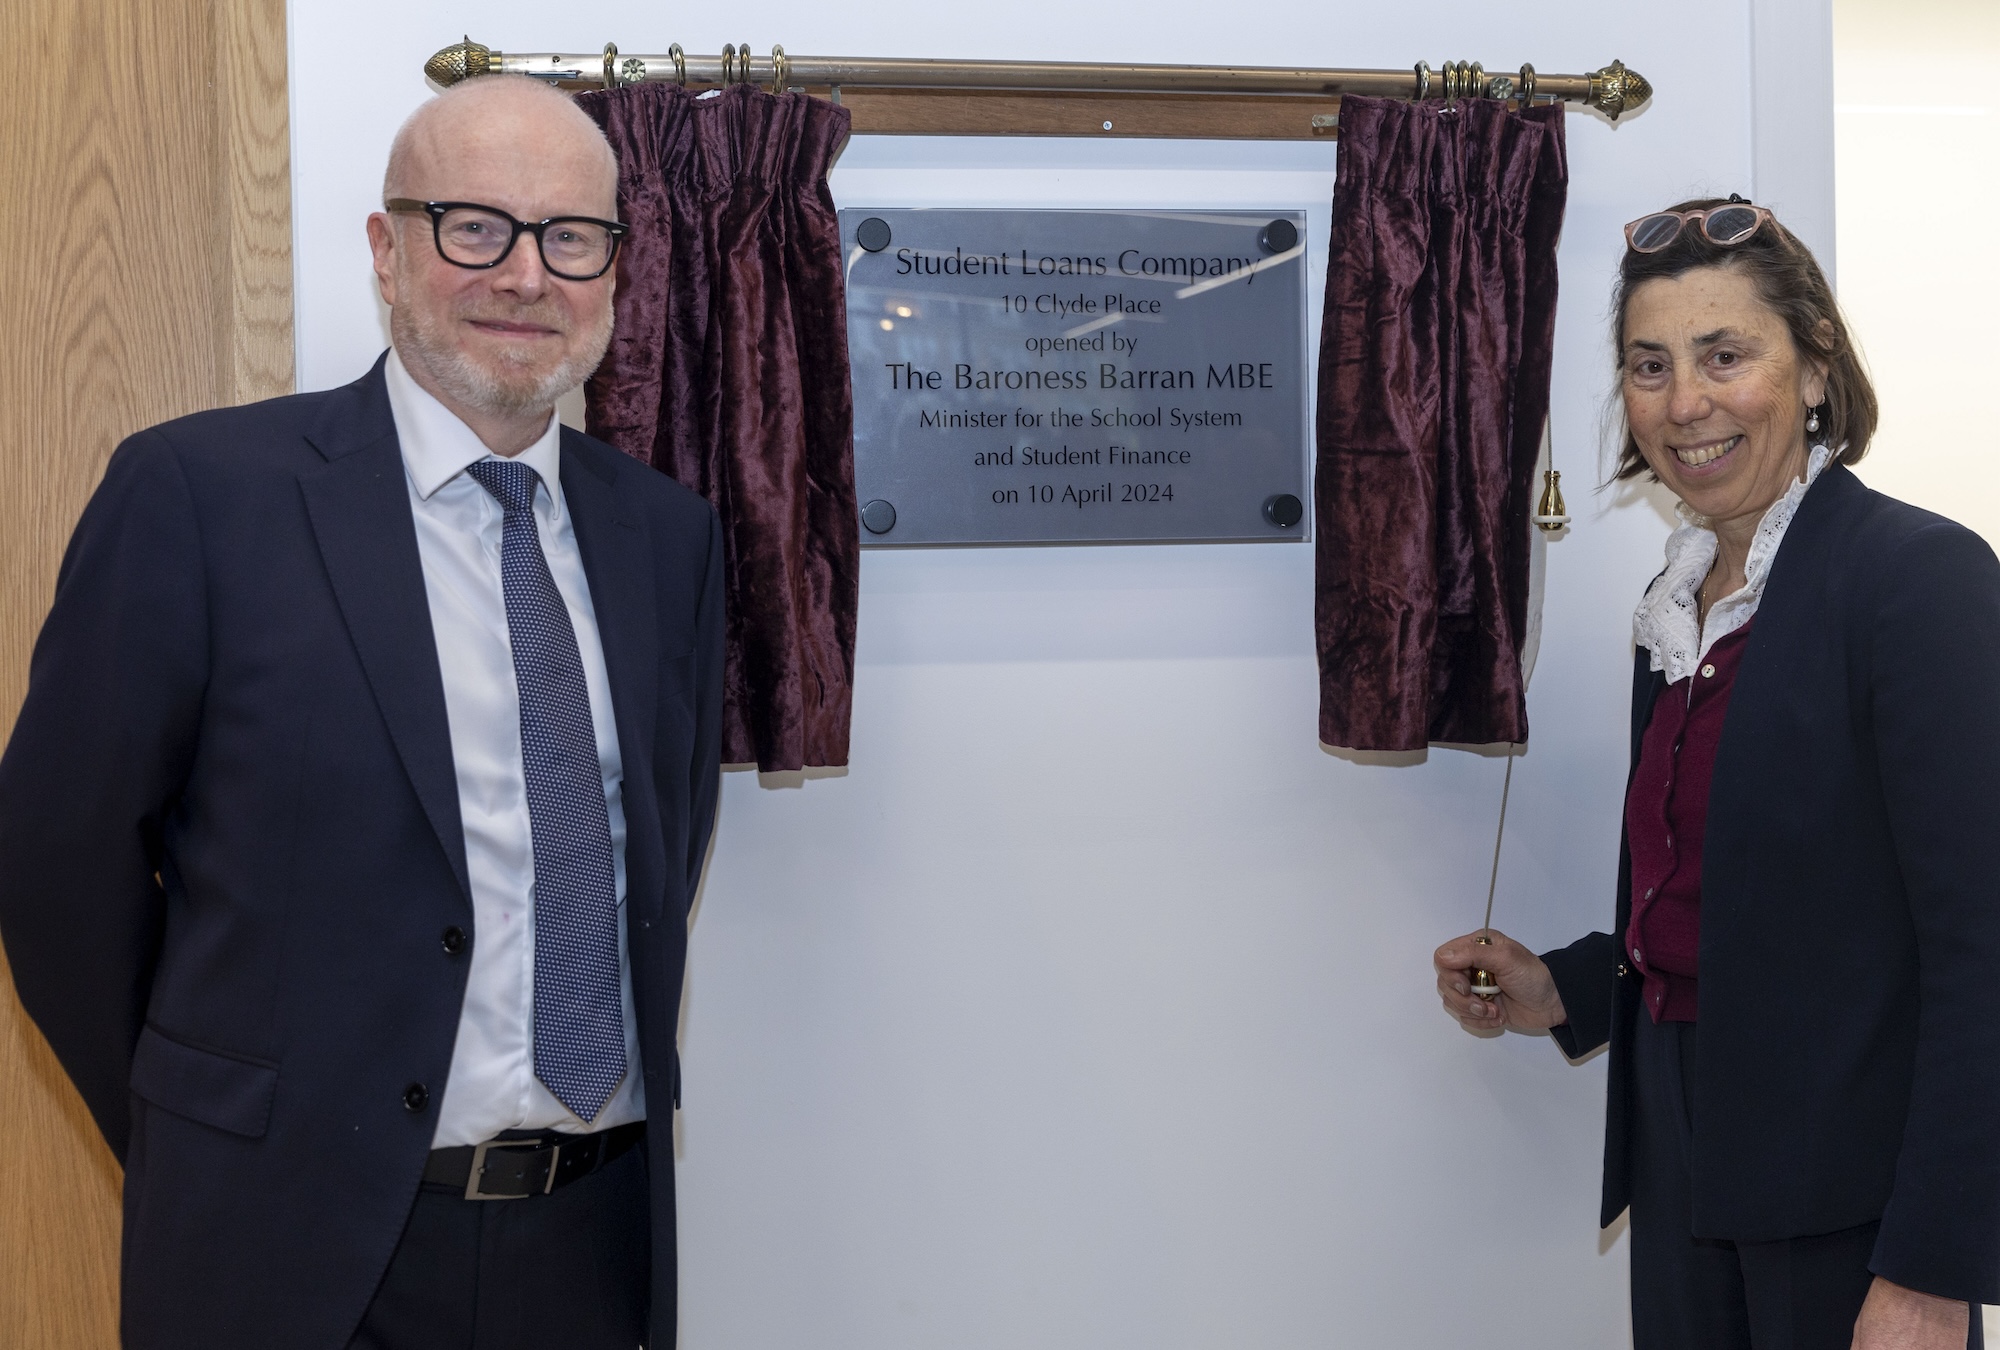 New SLC headquarters officially opened in Glasgow